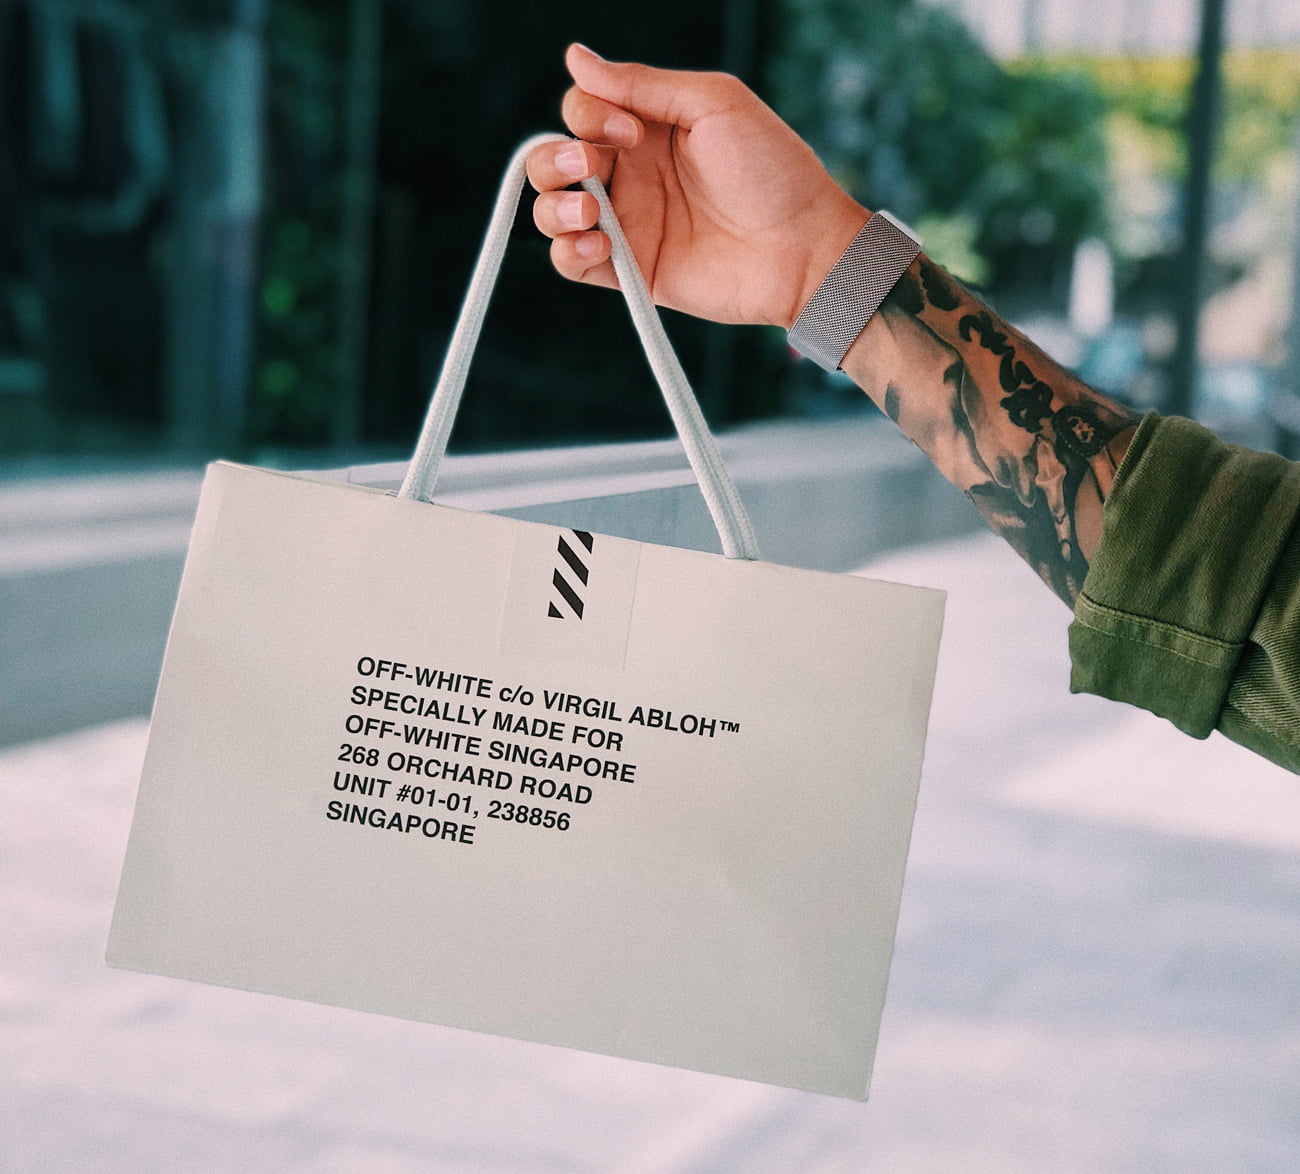 Off-White, Bags, Virgil Abloh Figures Of Speech Tote